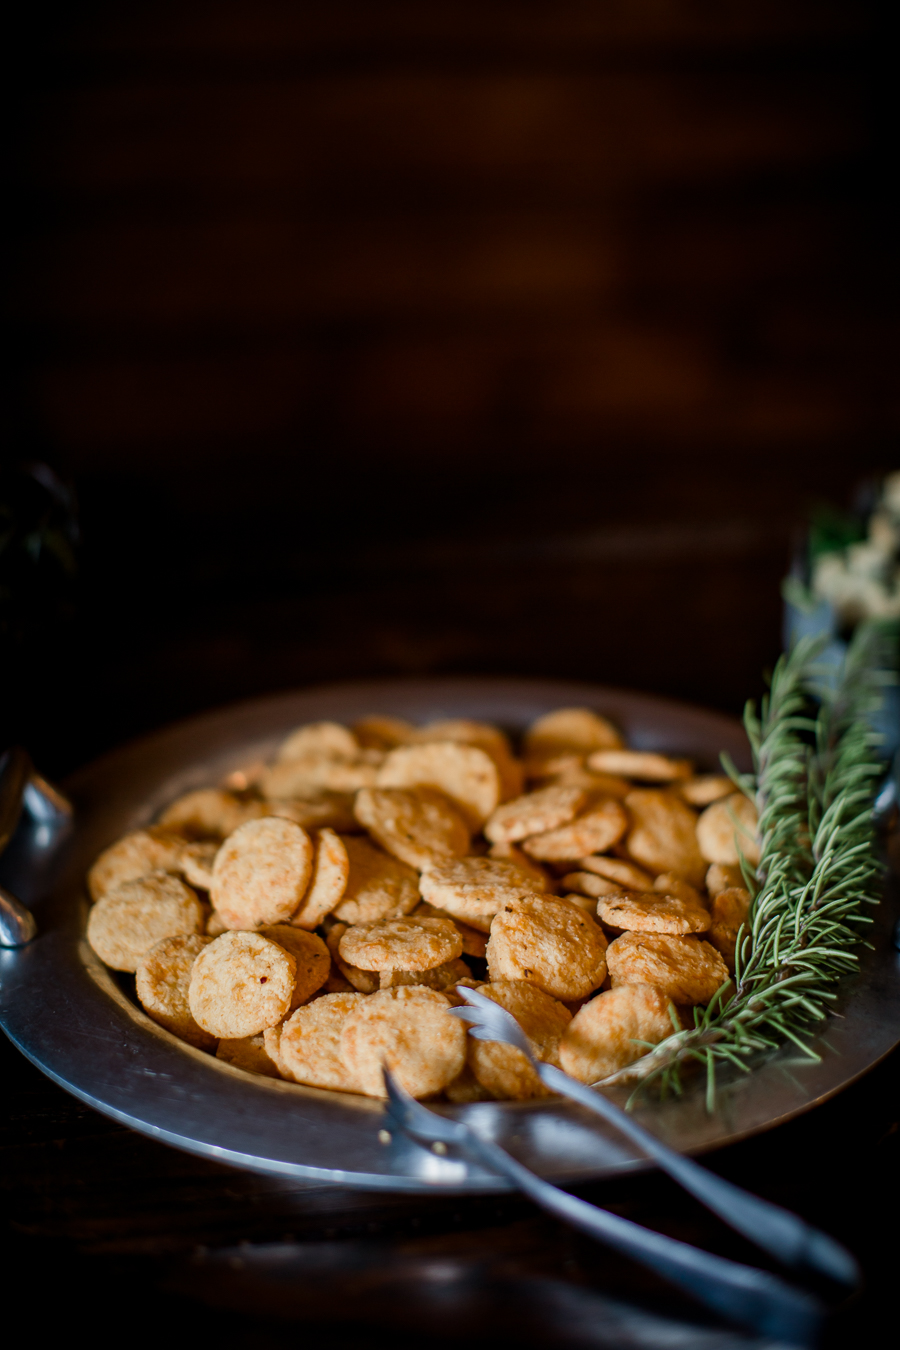 Creative Catering cookie at the open house of Knoxville Wedding Venue, Hunter Valley Farm, by Knoxville Wedding Photographer, Amanda May Photos.